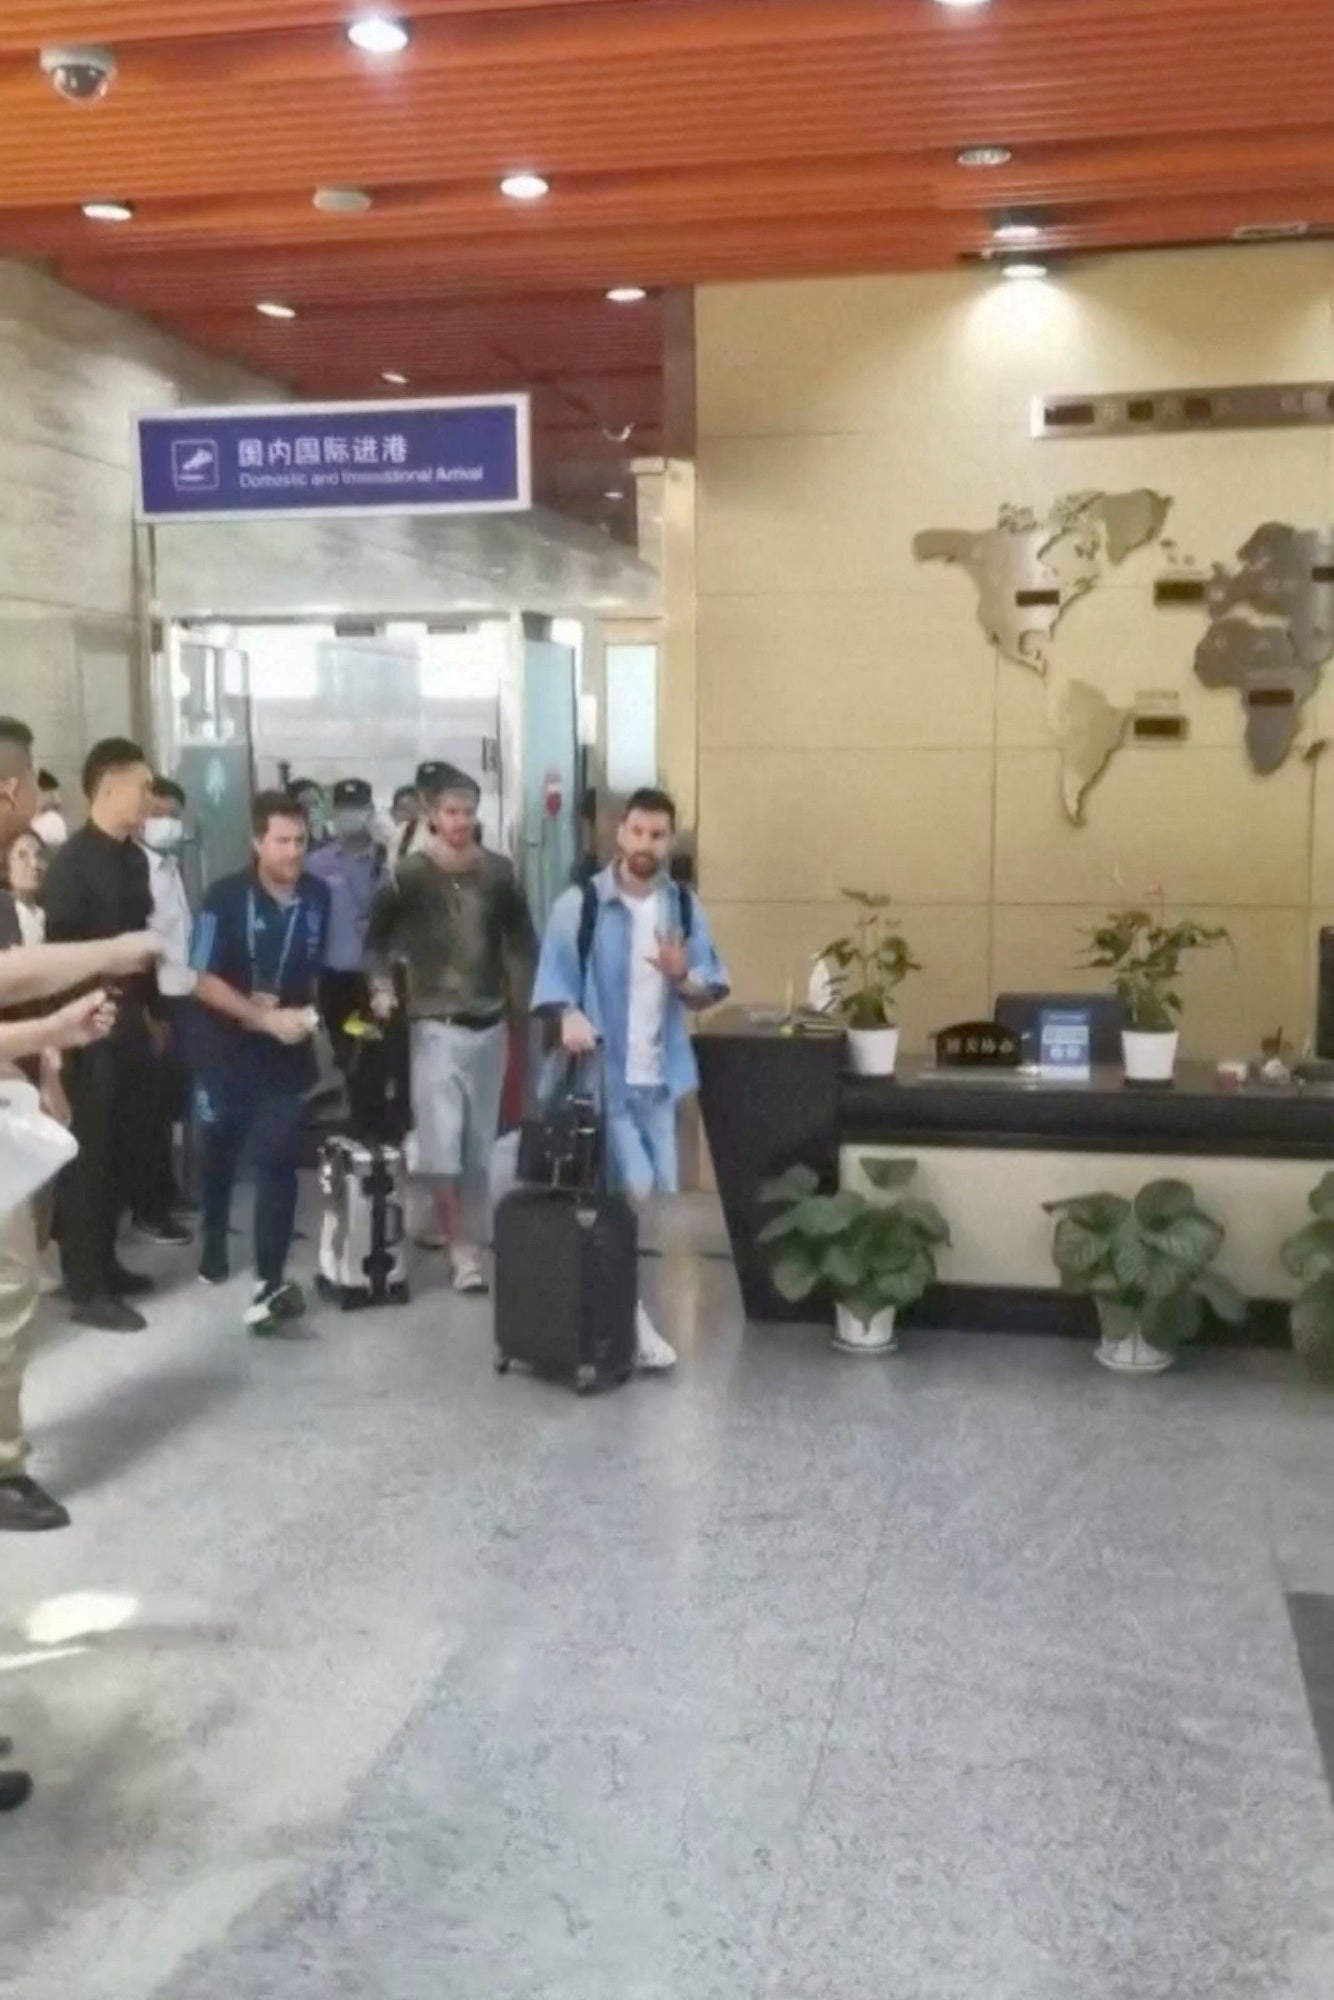 Messi arriving at Beijing airport shortly before the passport-related drama